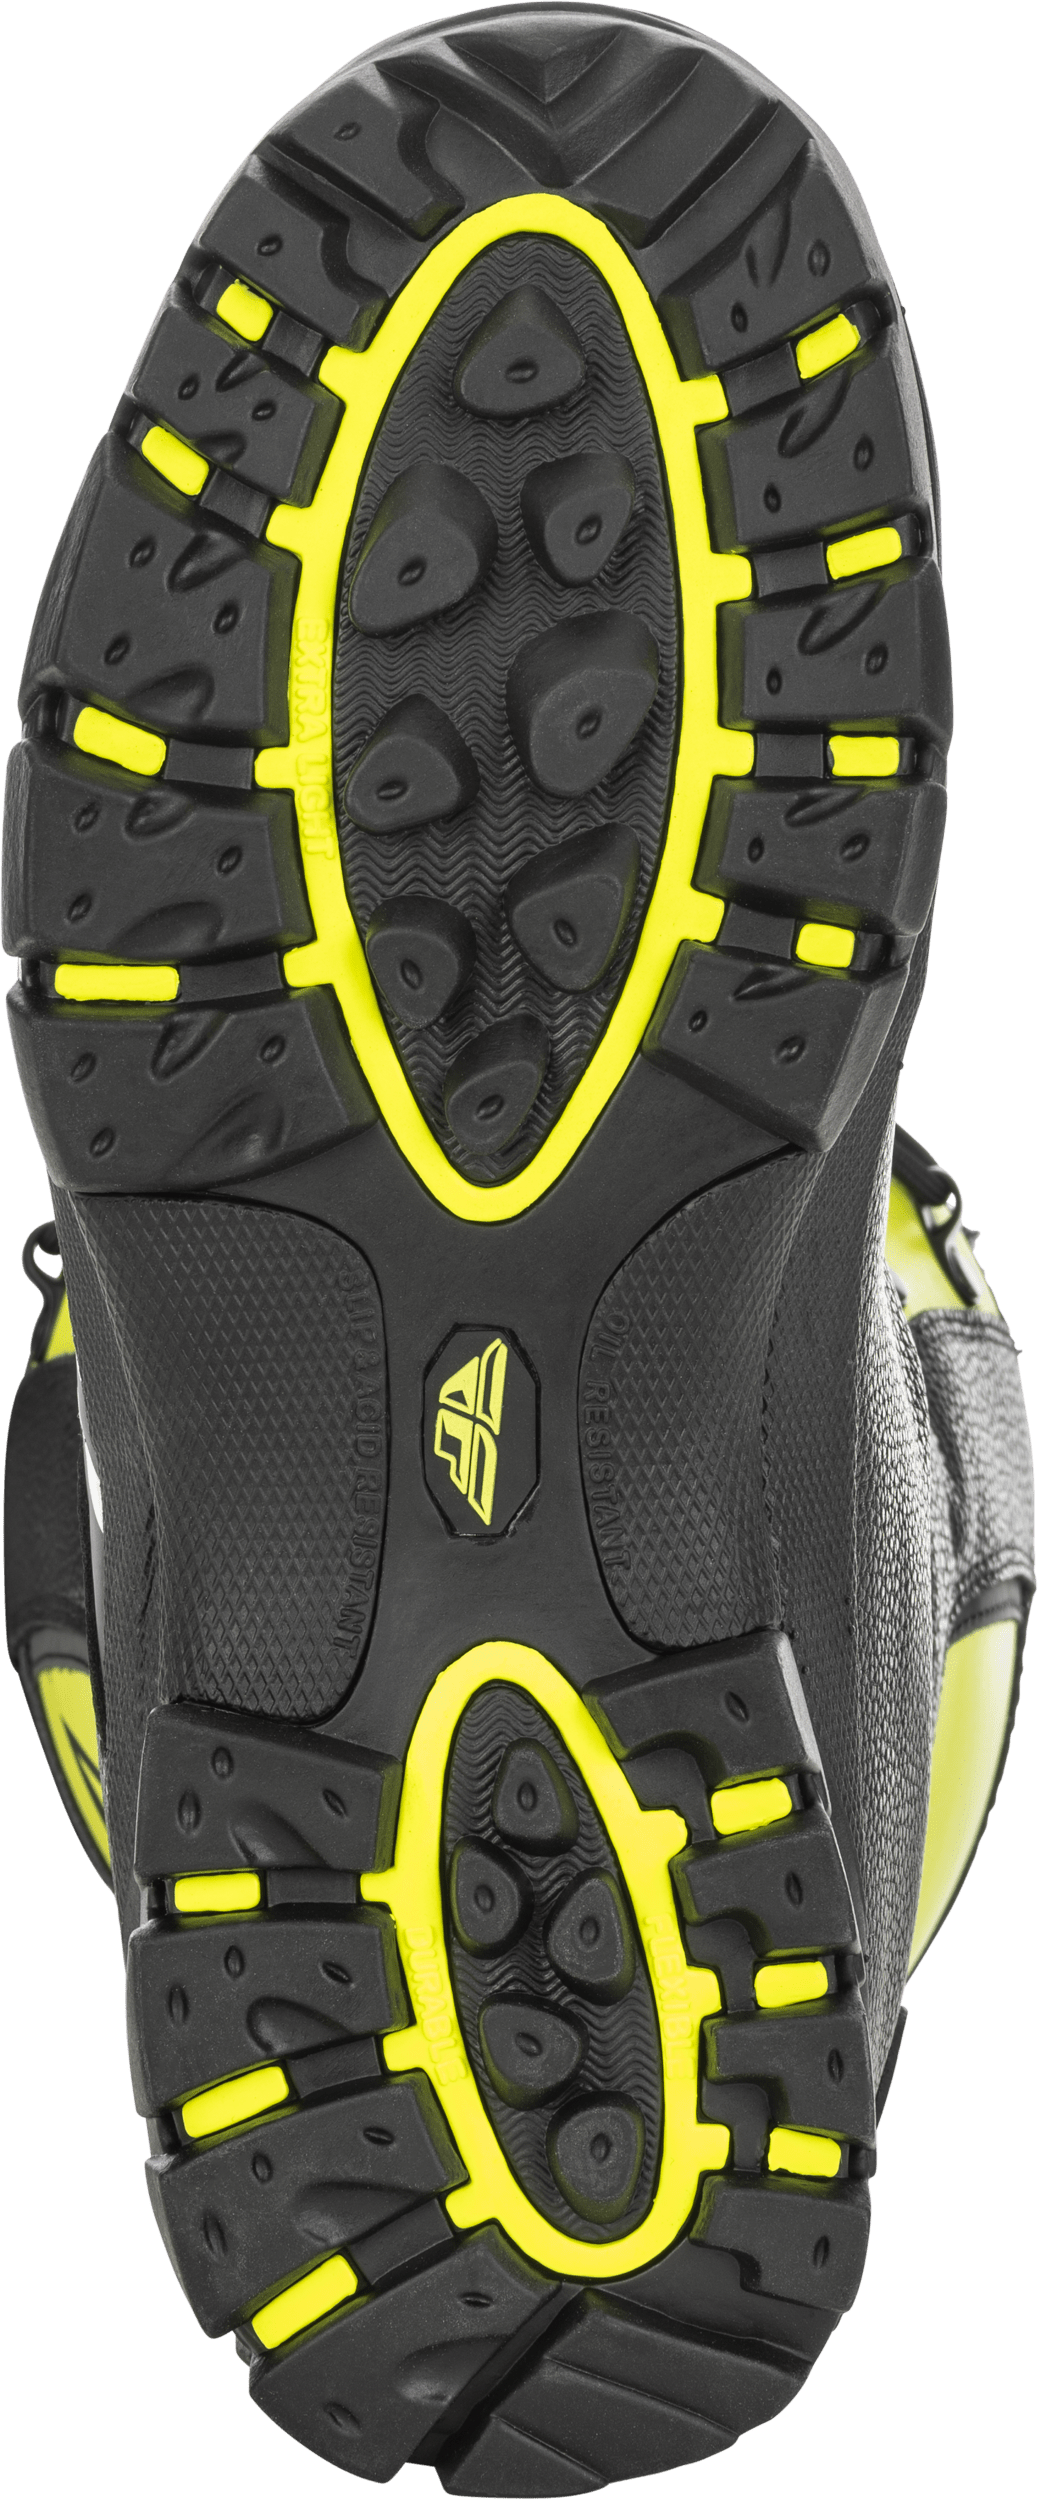 Western Powersports Boots Youth Marker Boot by Fly Racing